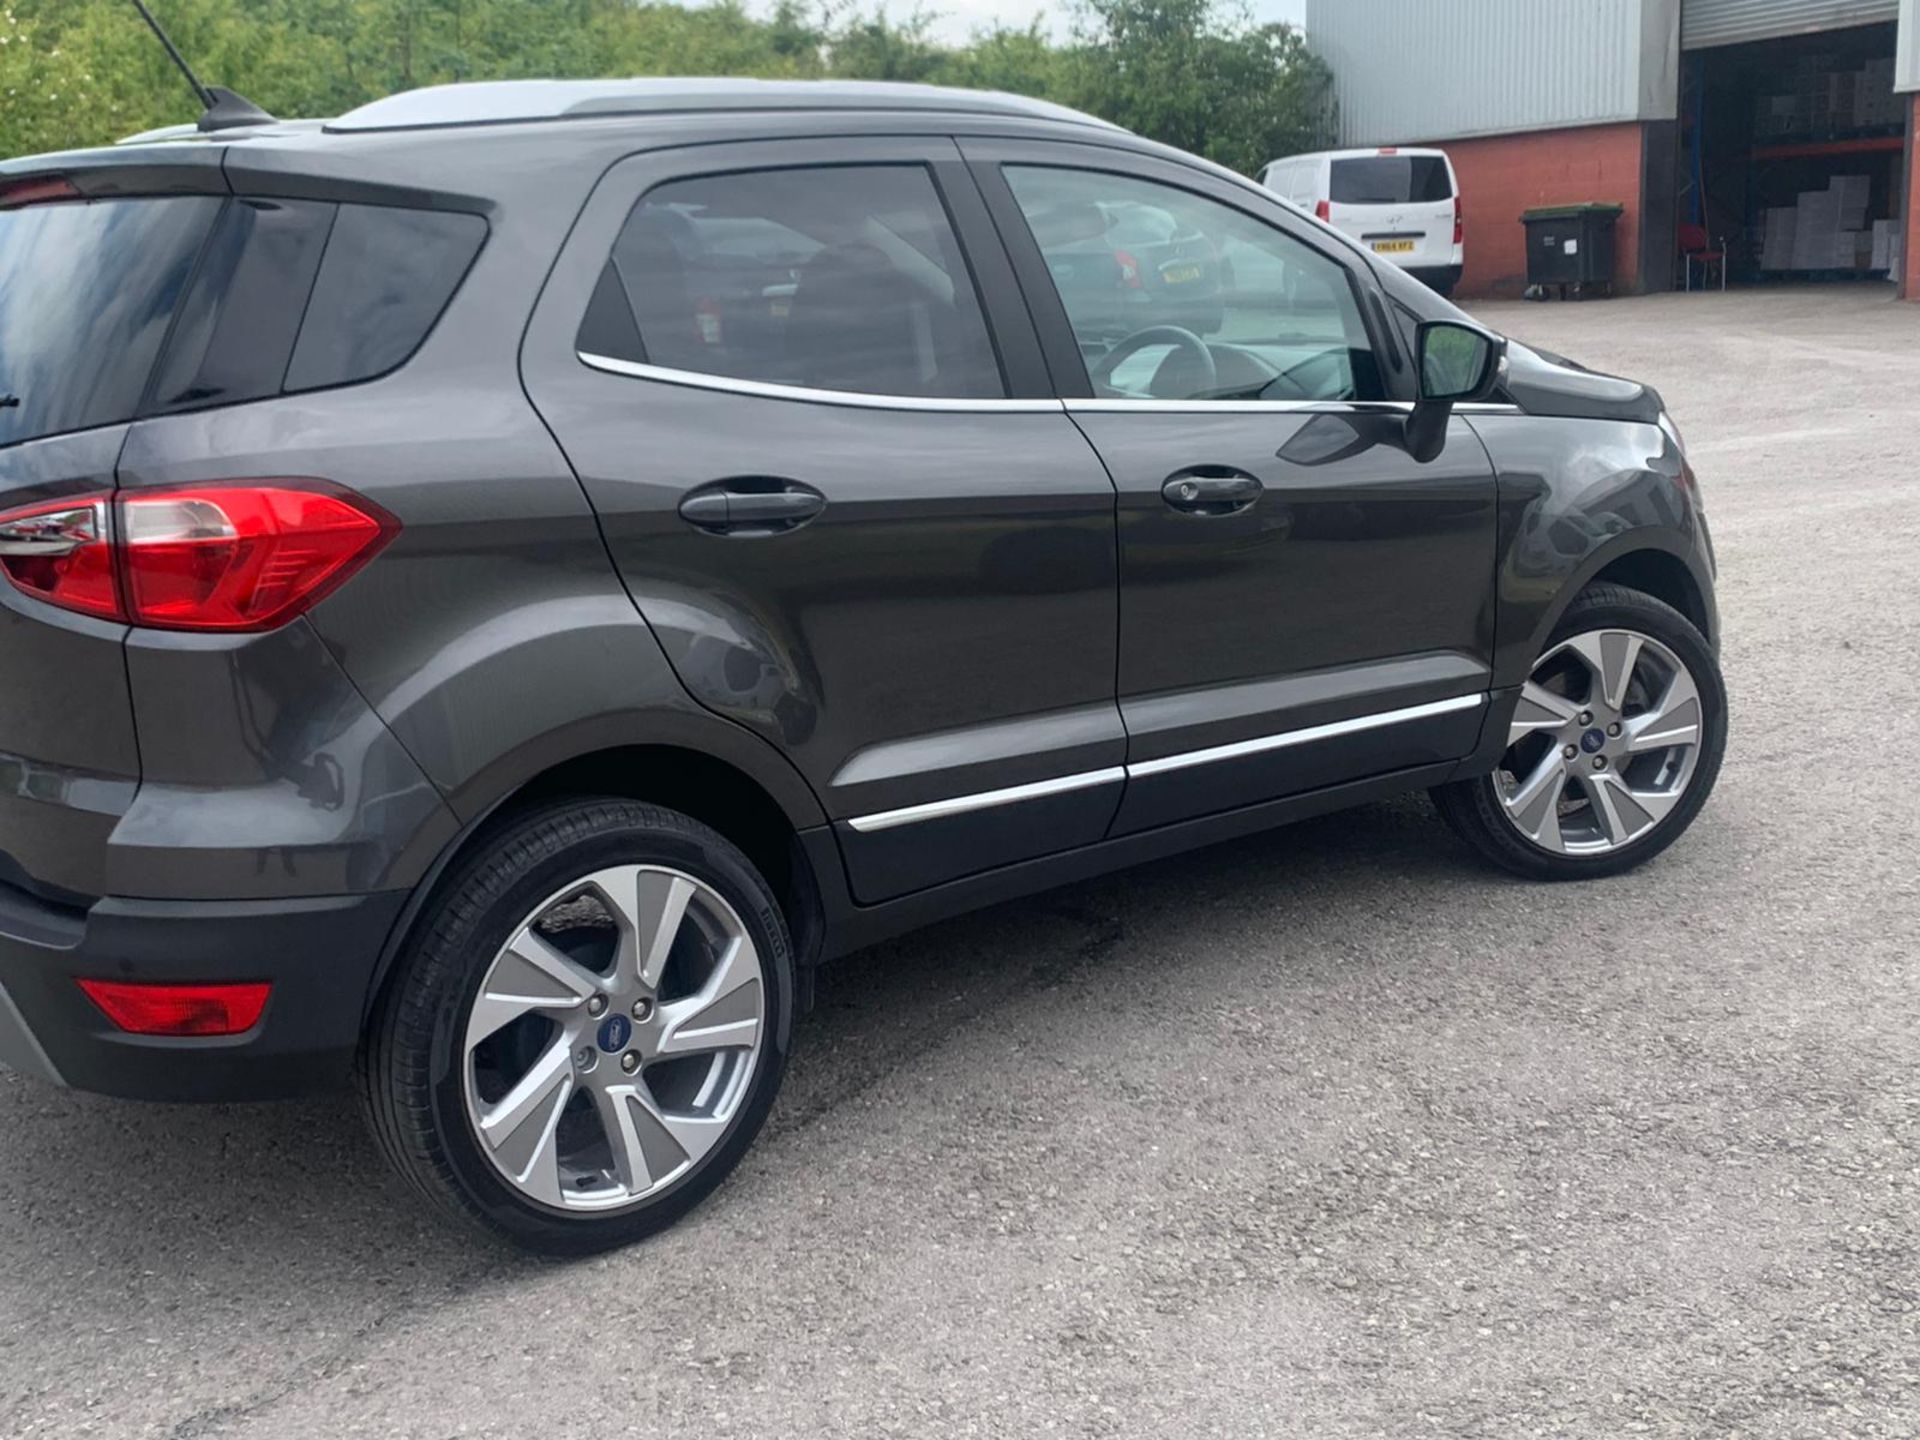 2019/19 REG FORD ECOSPORT TITANIUM 998CC PETROL 125BHP 5DR, SHOWING 0 FORMER KEEPERS *NO VAT* - Image 6 of 14